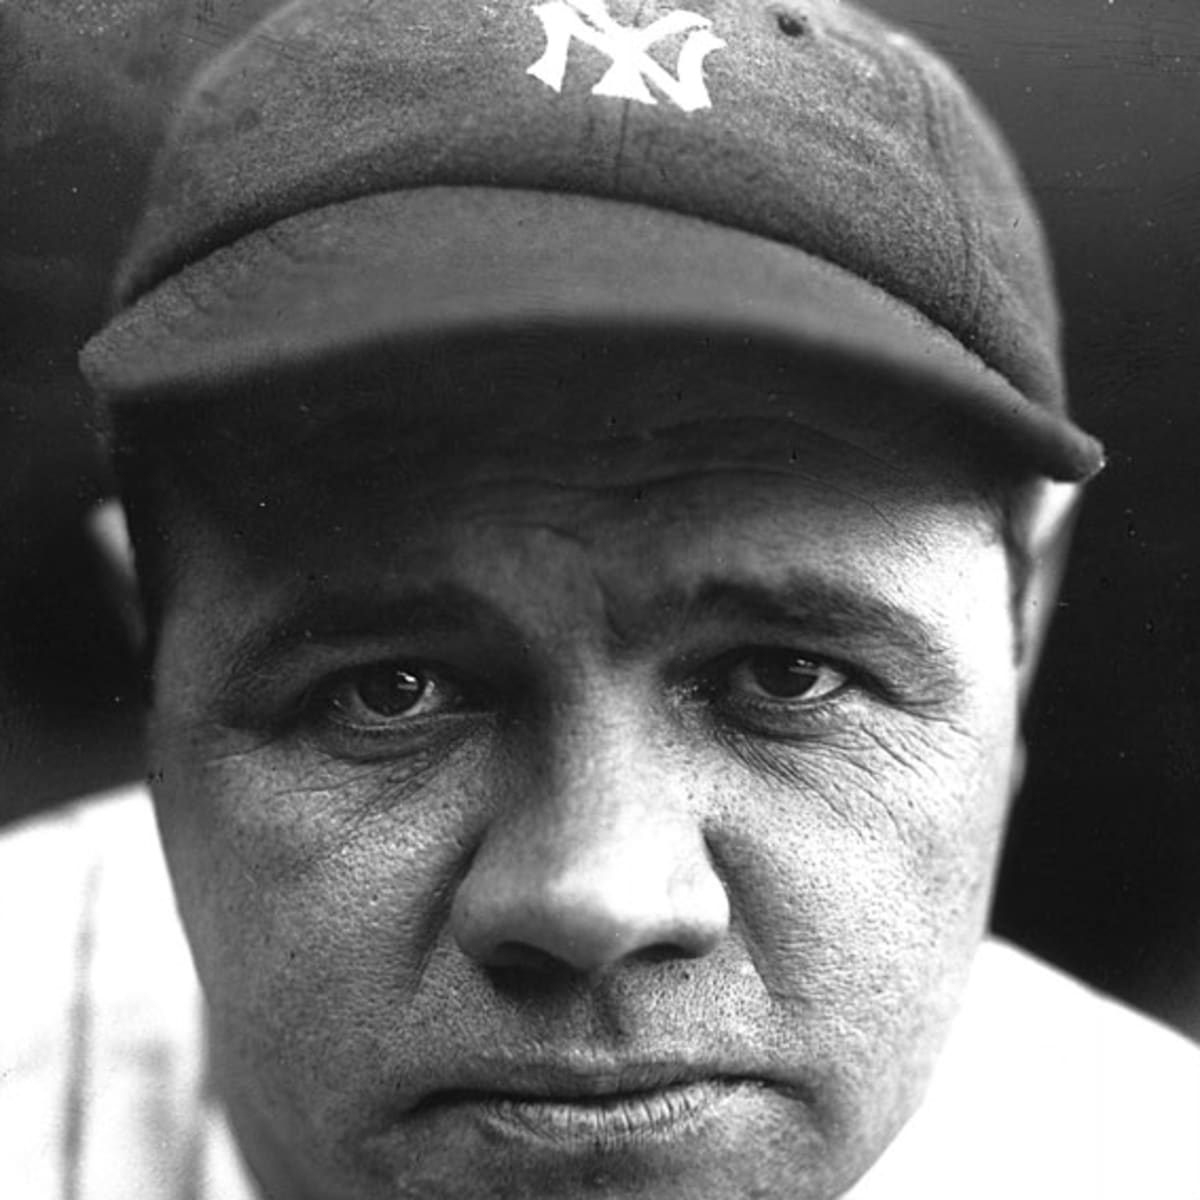 July 11, 1914: Babe Ruth makes his major-league debut with Red Sox